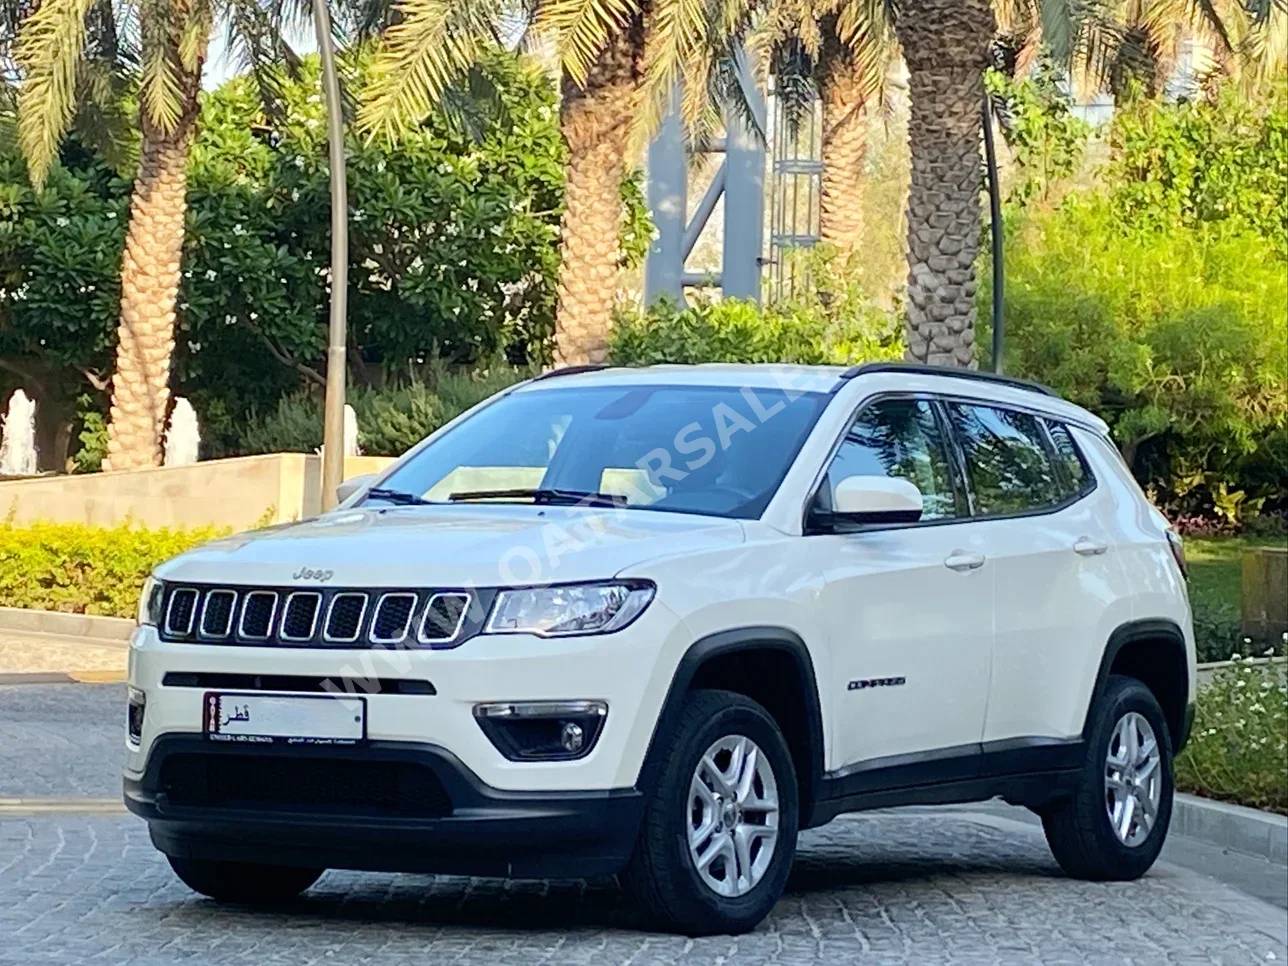 Jeep  Compass  longitude  2020  Automatic  38,000 Km  4 Cylinder  Four Wheel Drive (4WD)  SUV  White